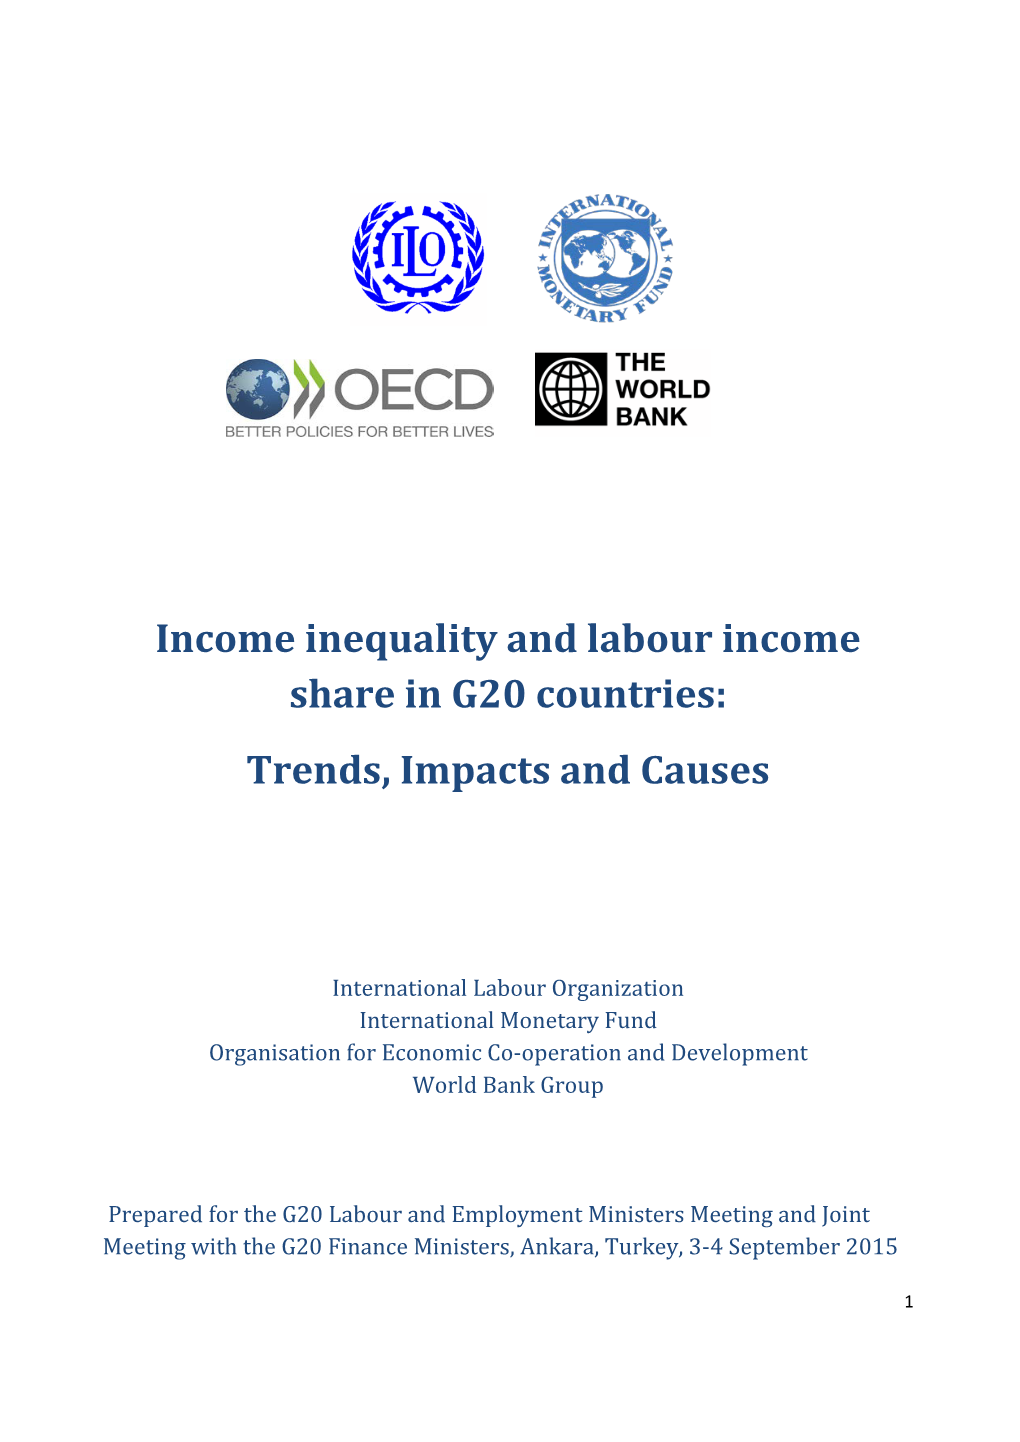 Income Inequality and Labour Income Share in G20 Countries: Trends, Impacts and Causes